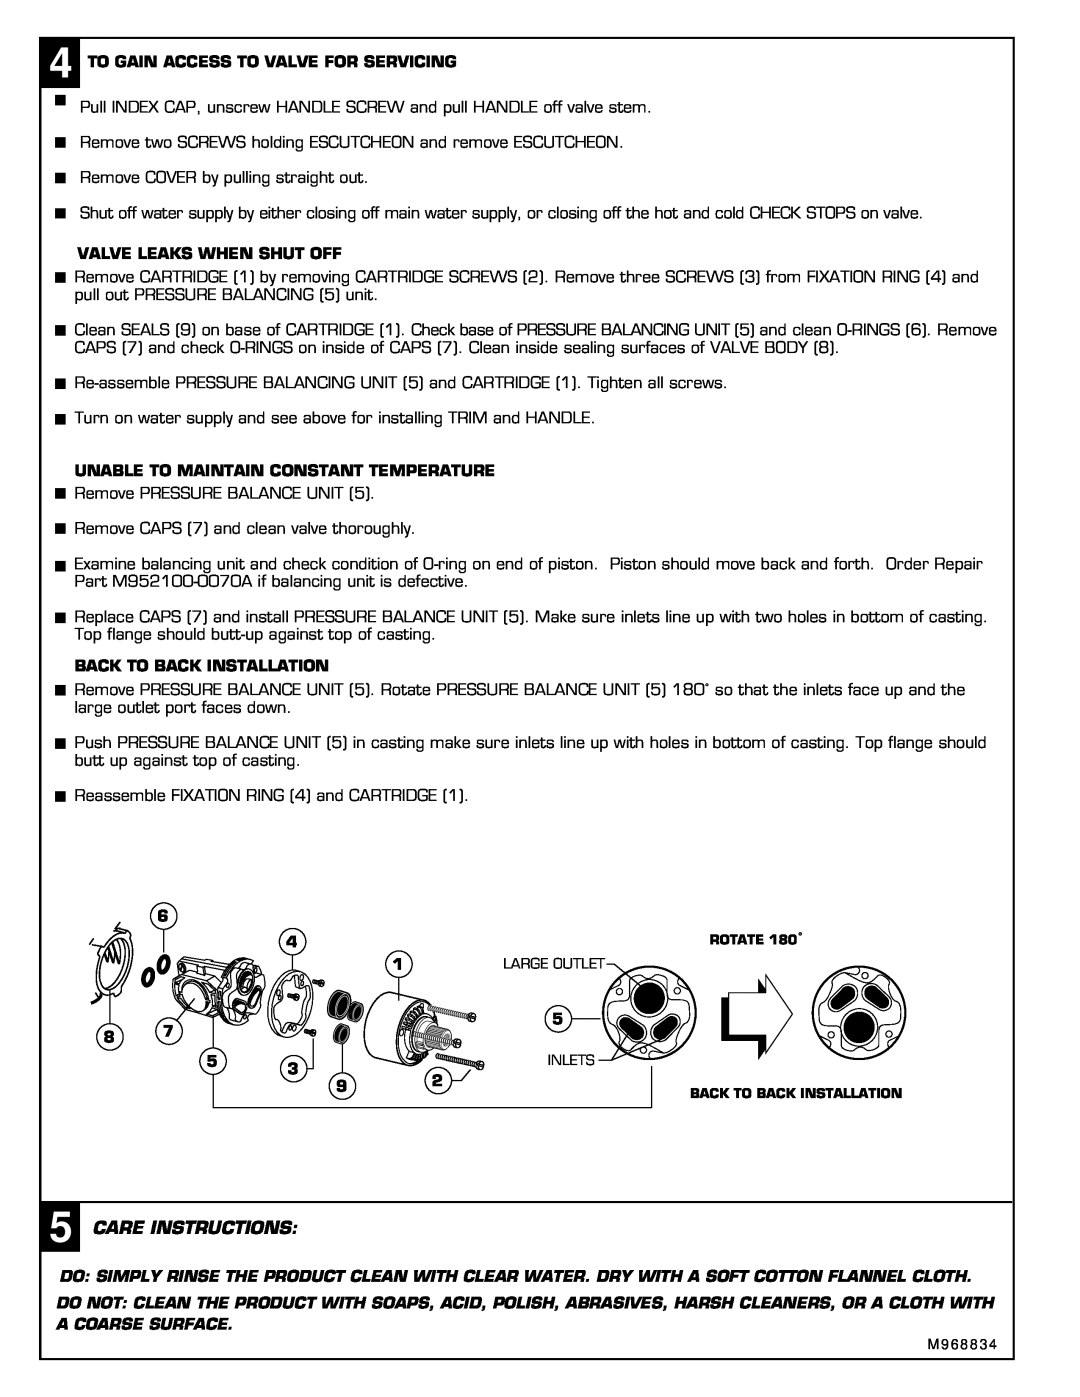 American Standard T028.50X Care Instructions, To Gain Access To Valve For Servicing, Valve Leaks When Shut Off, 6 4 8 